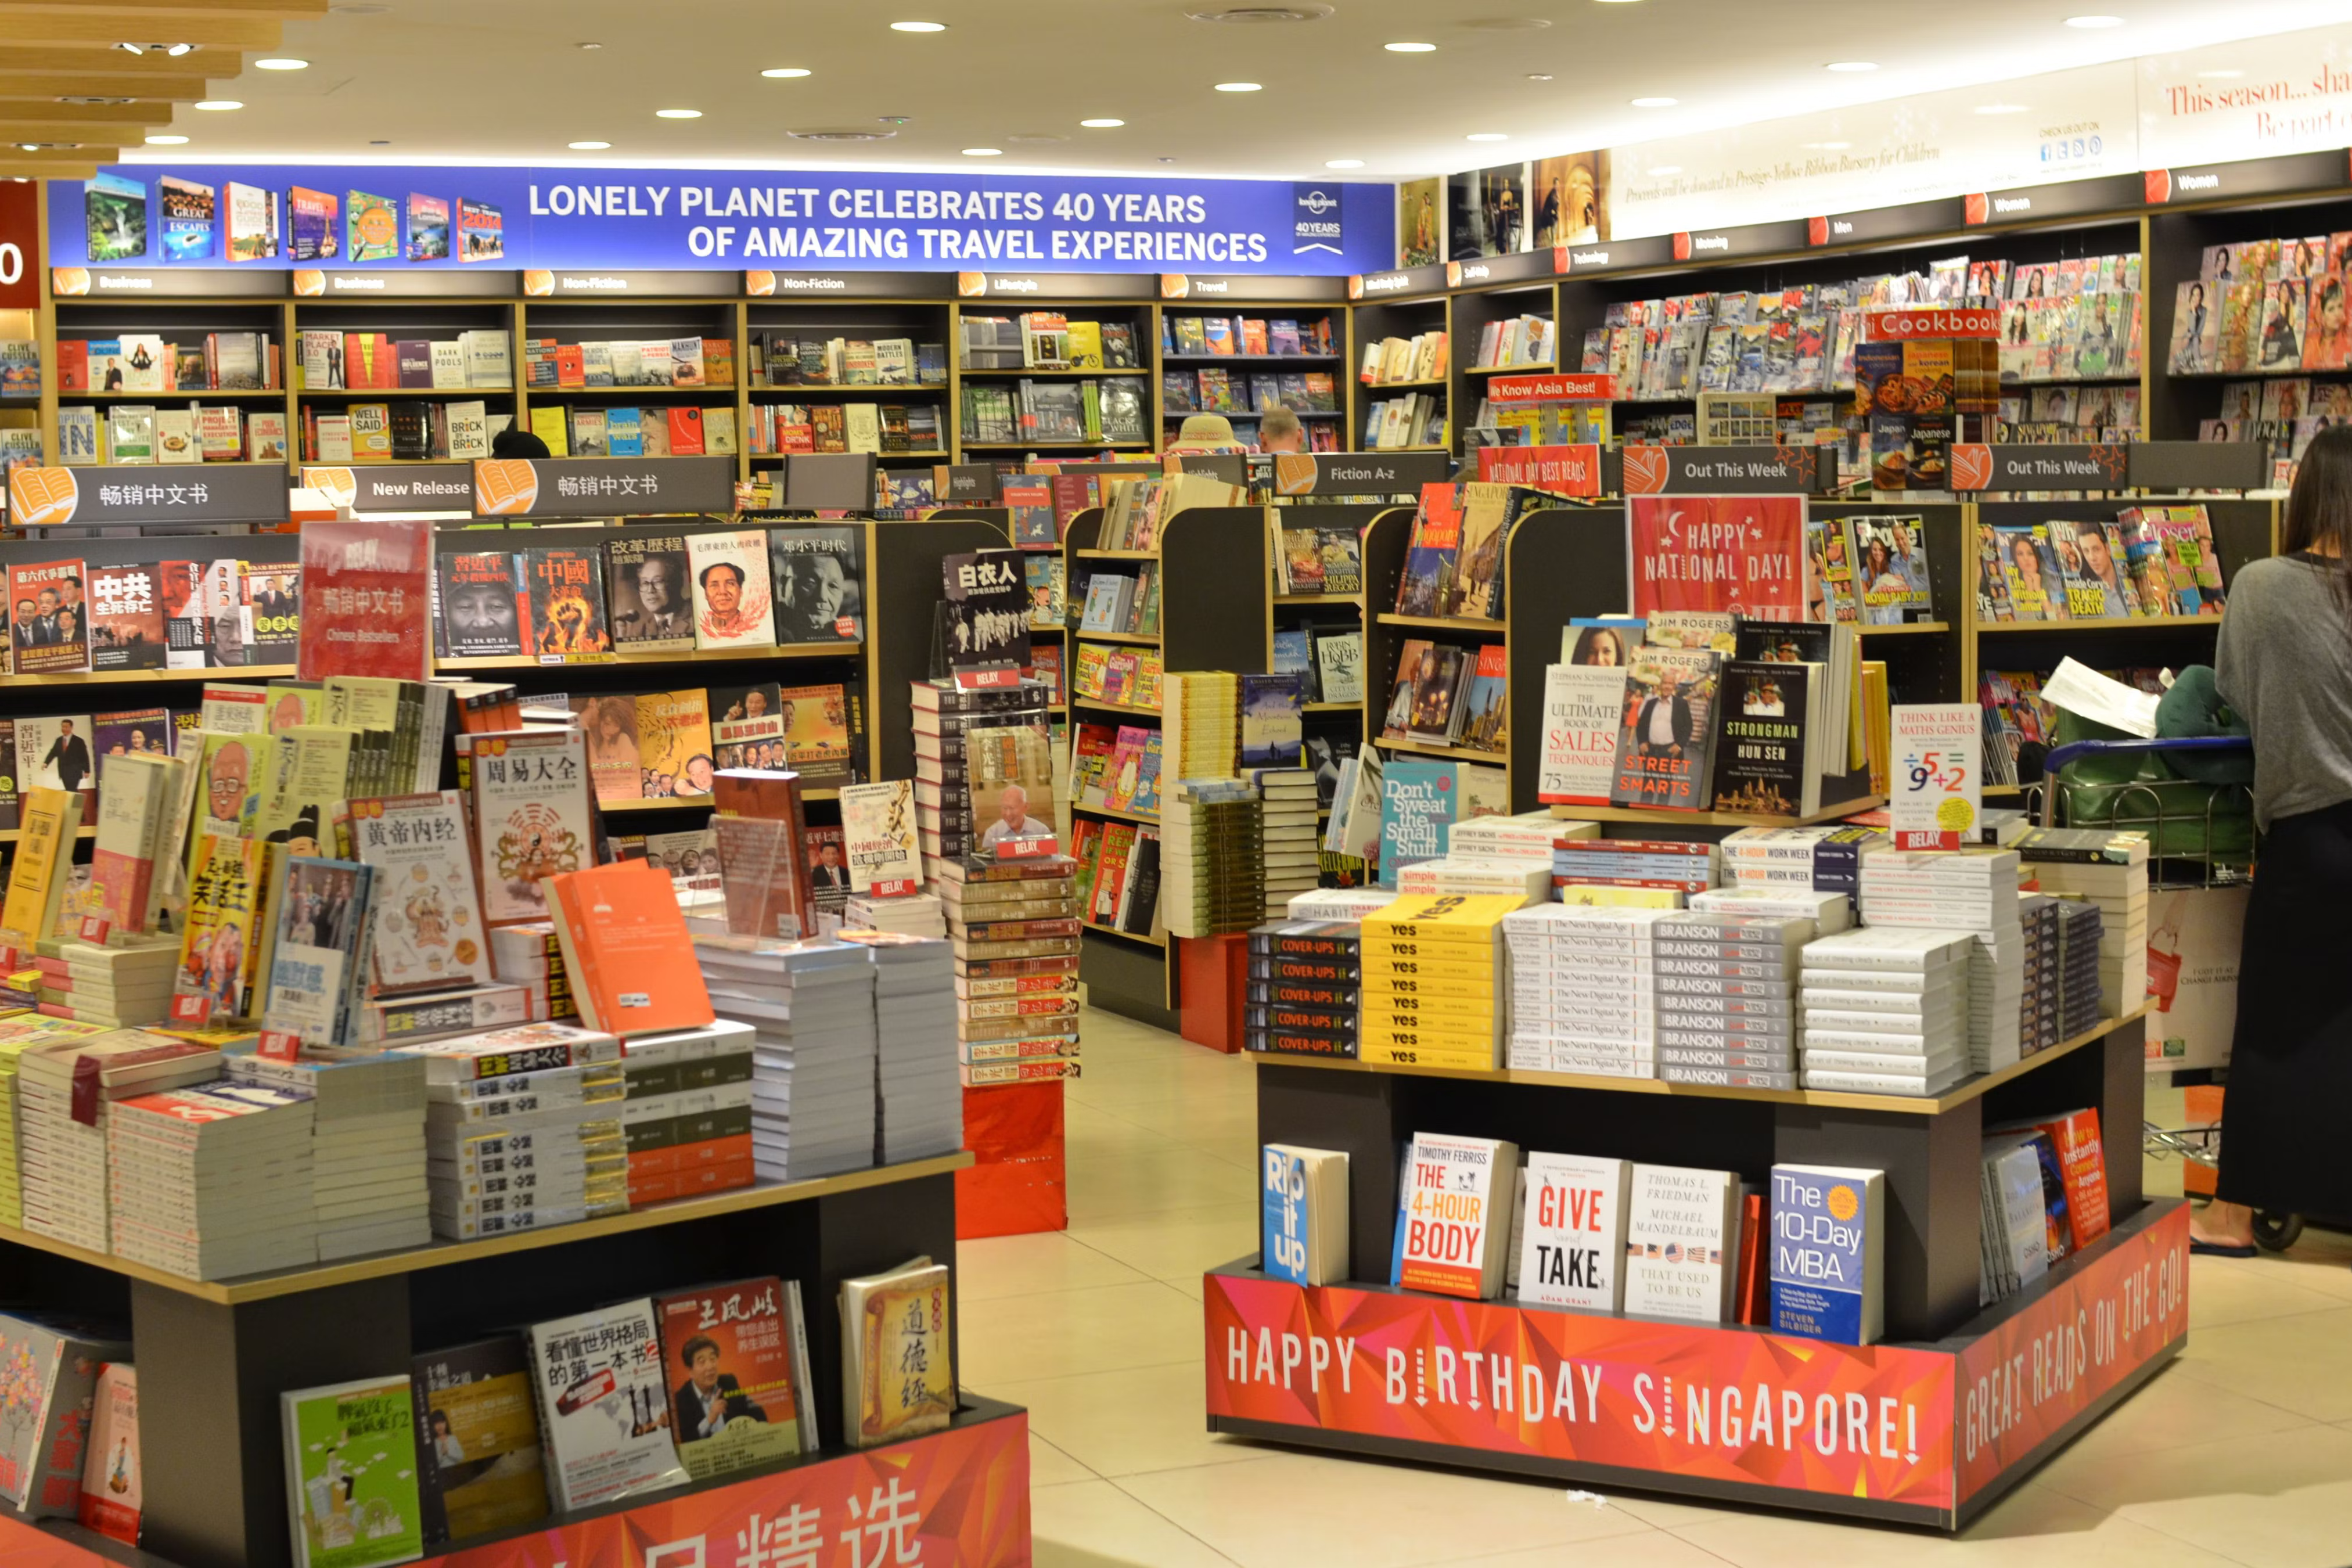 Inside A bookstore at Singapore Changi Airport.